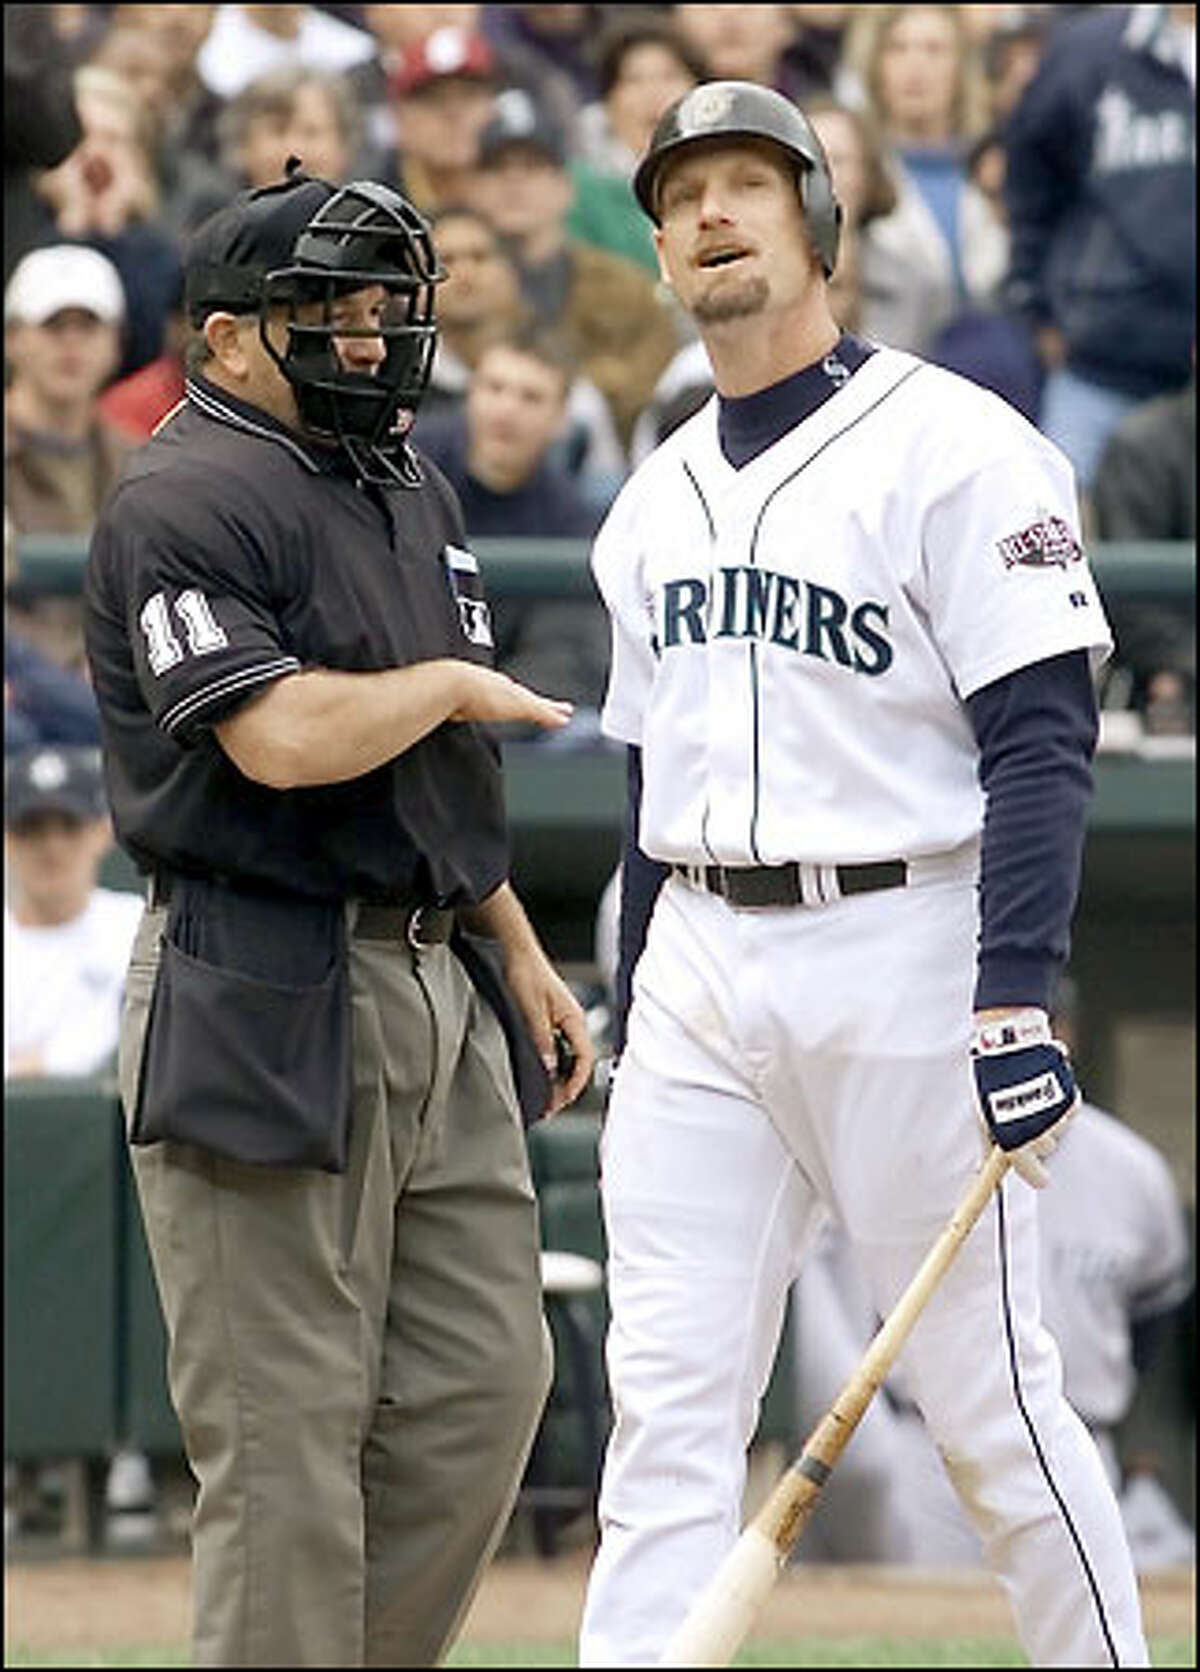 Jay Buhner strikes out and objects to the call as umpire Ed Montague shows him where it was in the ALCS Game 1, Oct. 17, 2001.